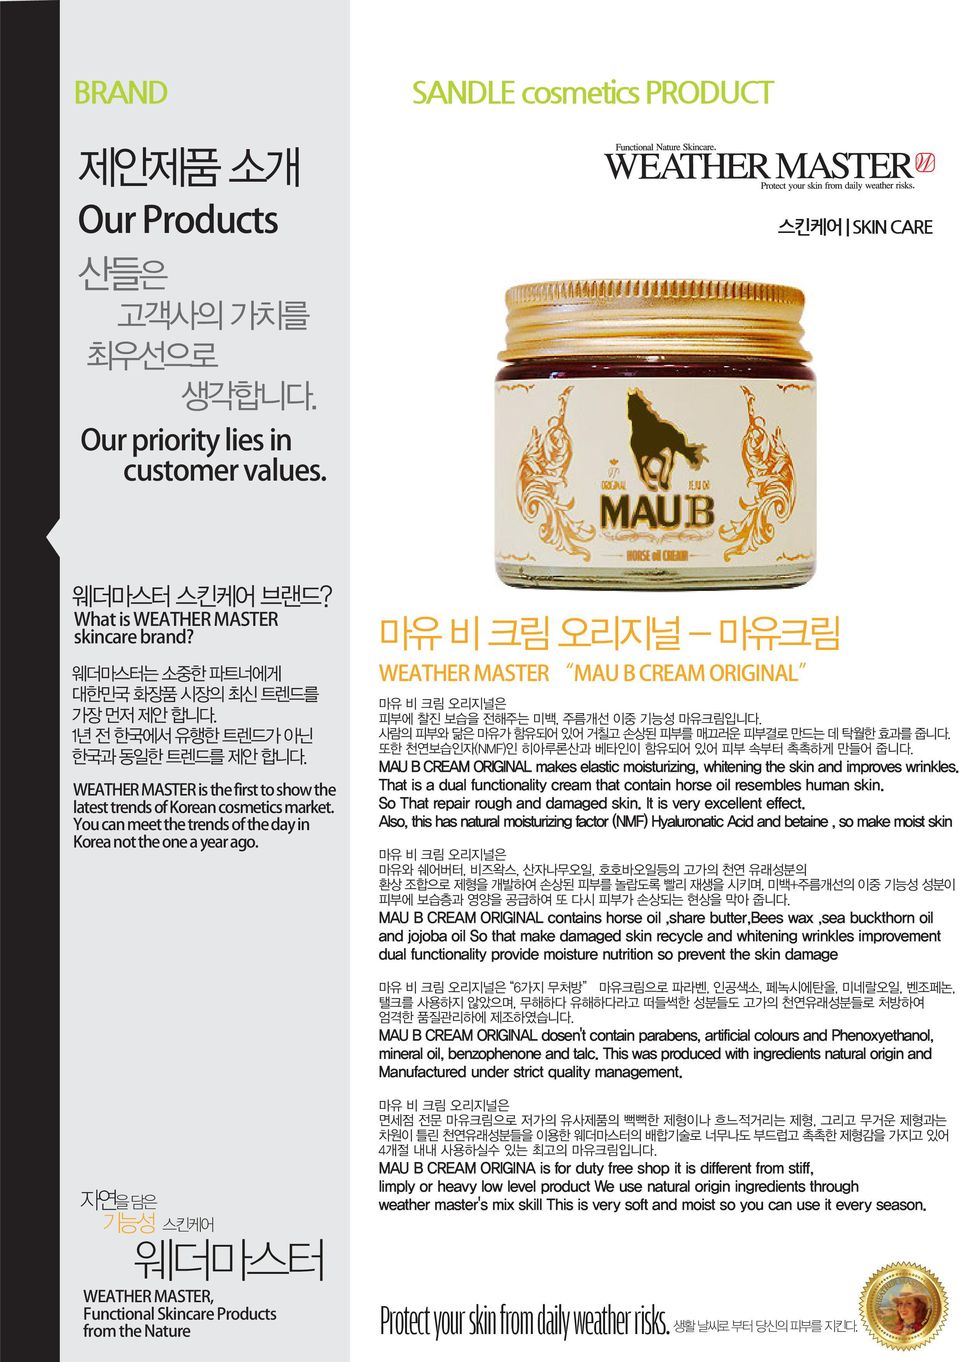 MAU B CREAM ORIGINAL makes elastic moisturizing, whitening the skin and improves wrinkles. That is a dual functionality cream that contain horse oil resembles human skin.